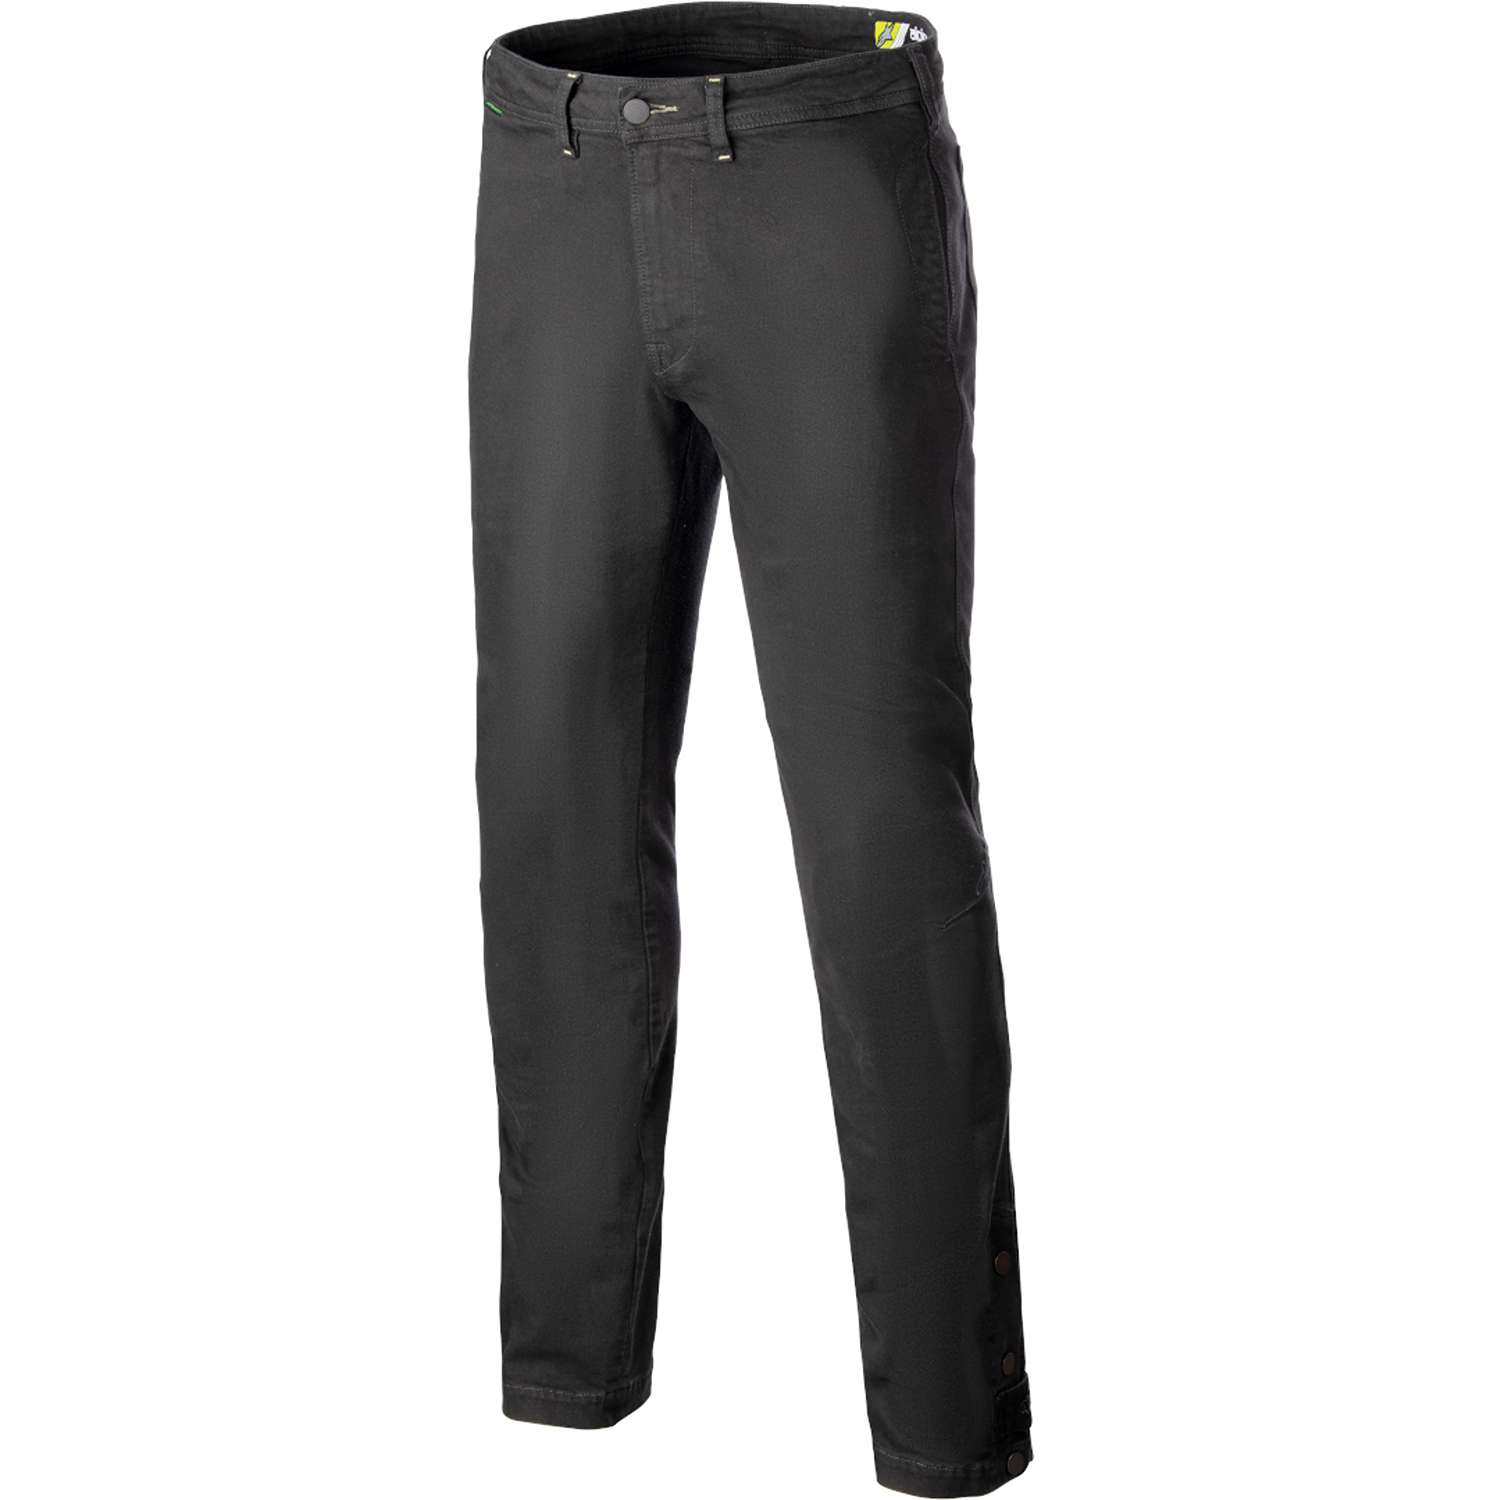 Image of Alpinestars Stratos Regular Fit Tech Riding Pants Anthracite Taille 33